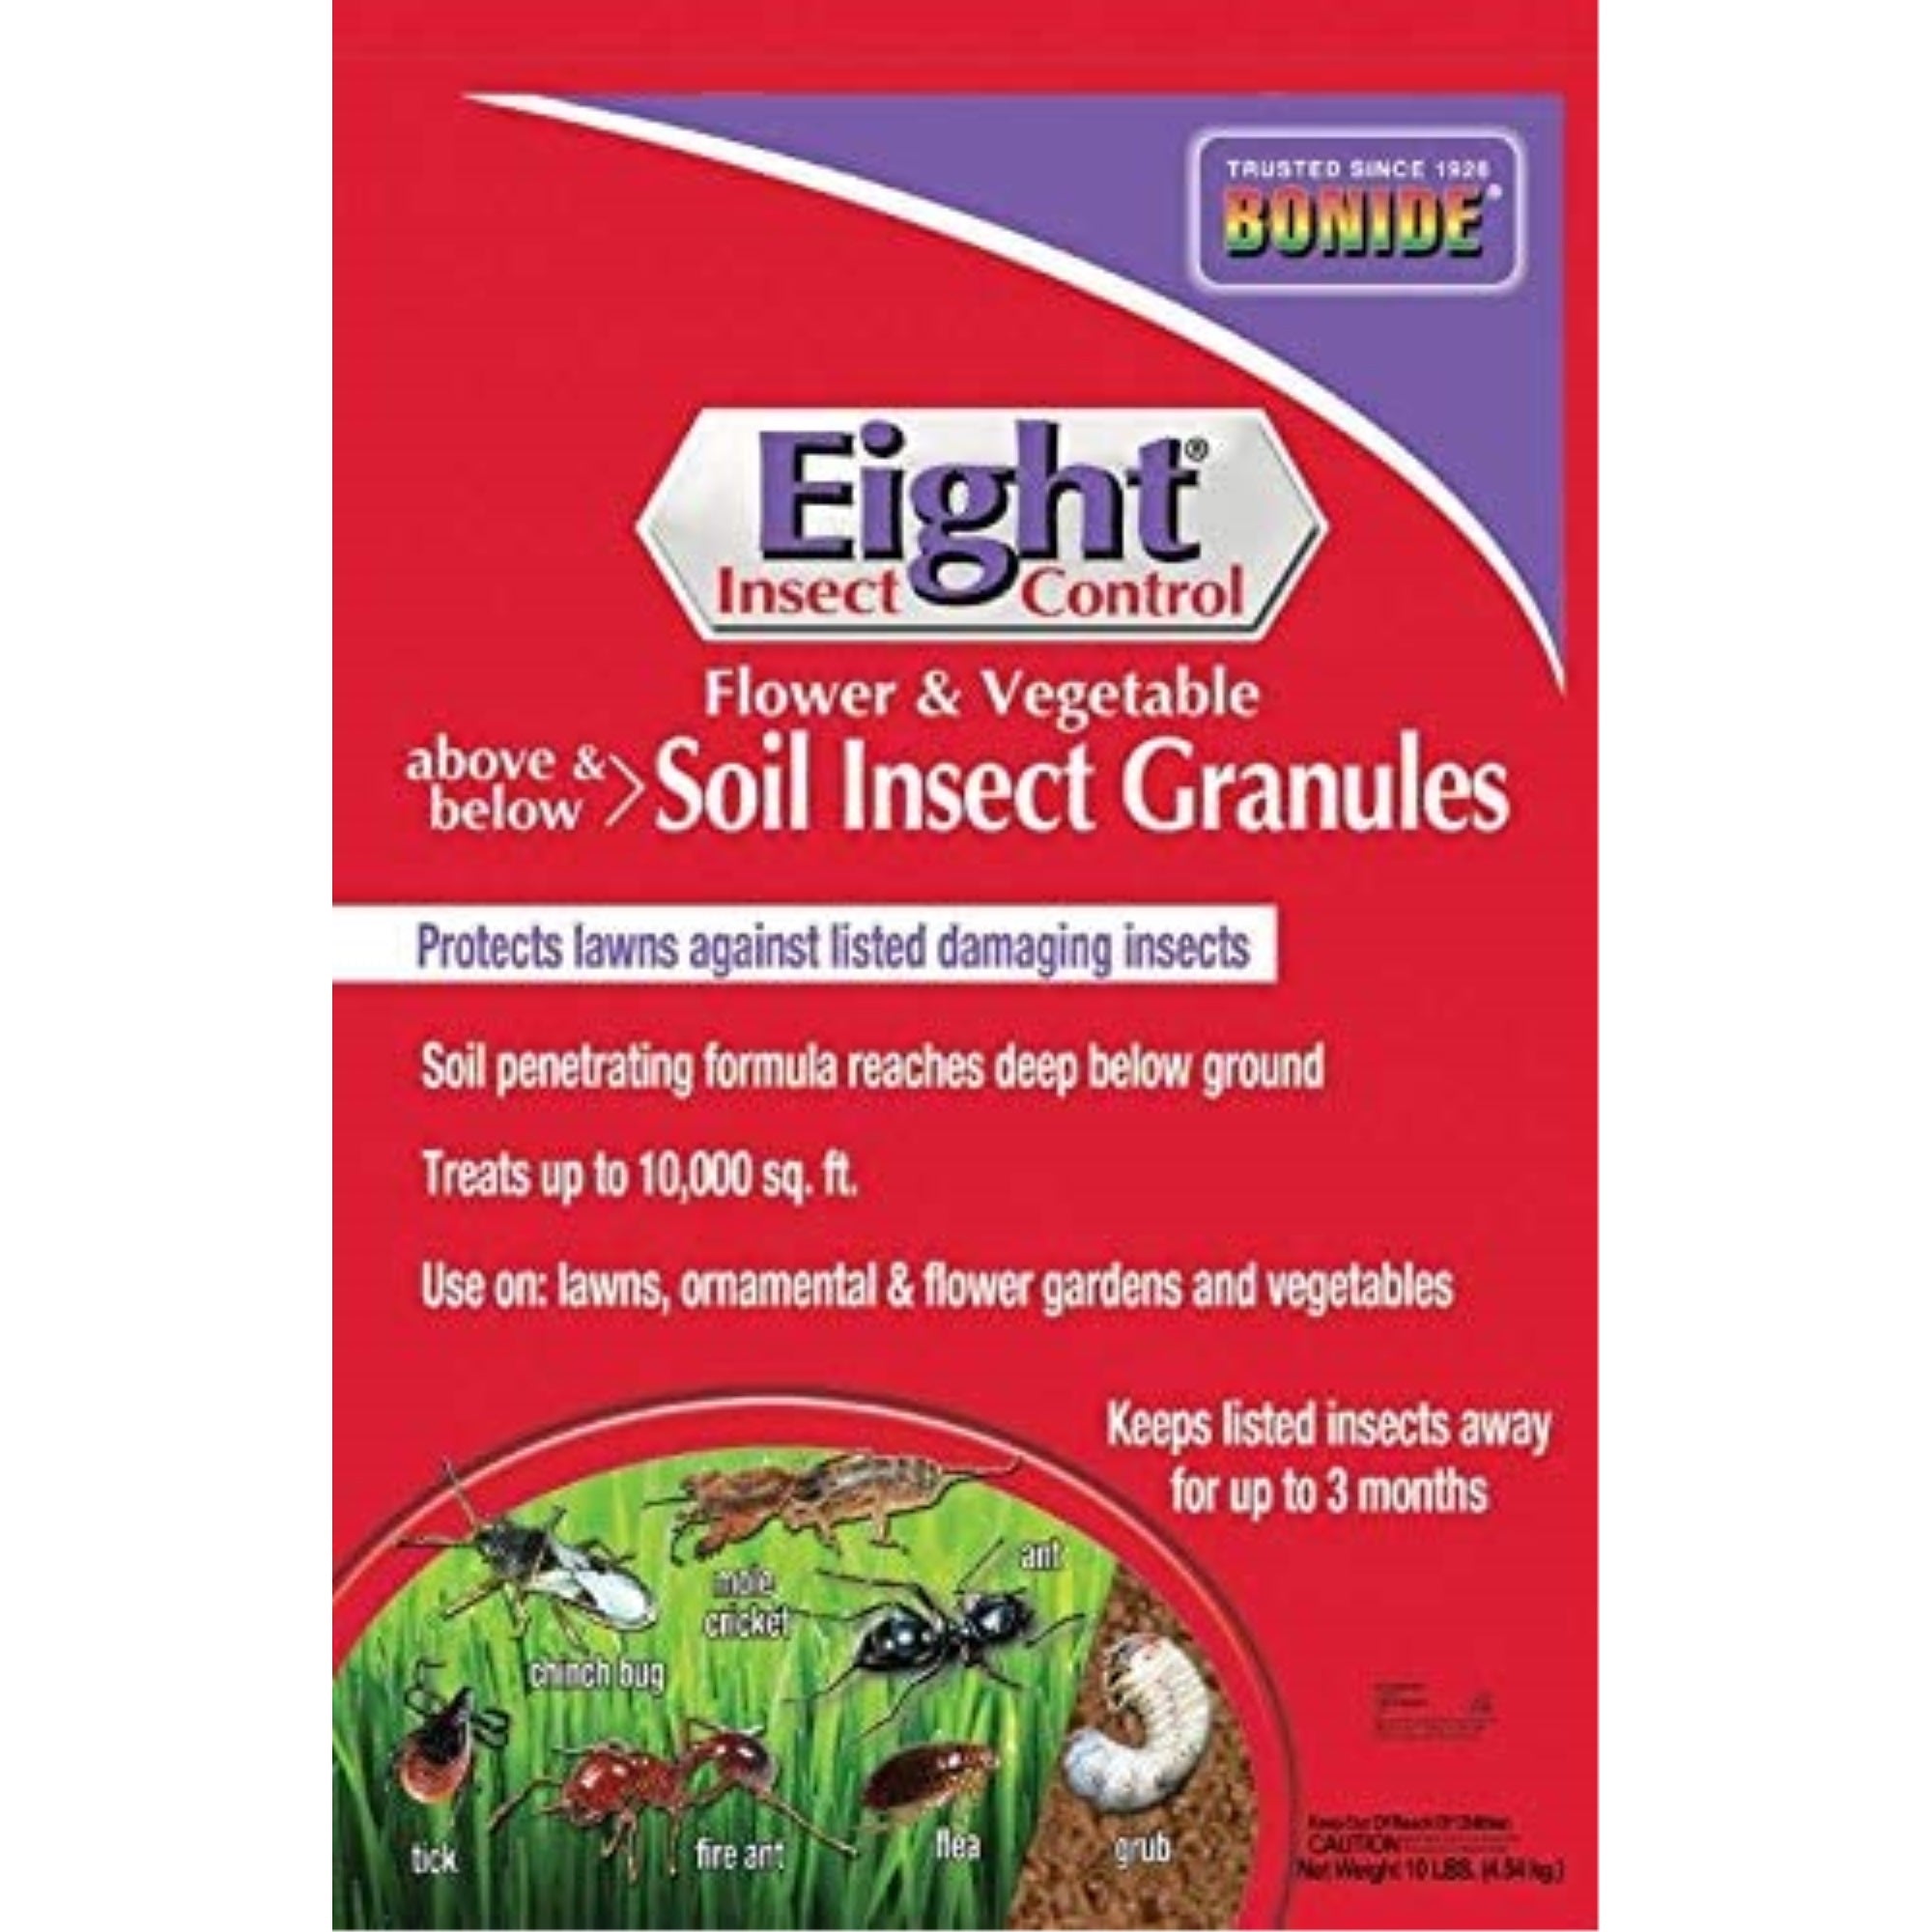 Bonide Eight Insect Control Flower & Vegetable Soil Insect Granules, 10lb